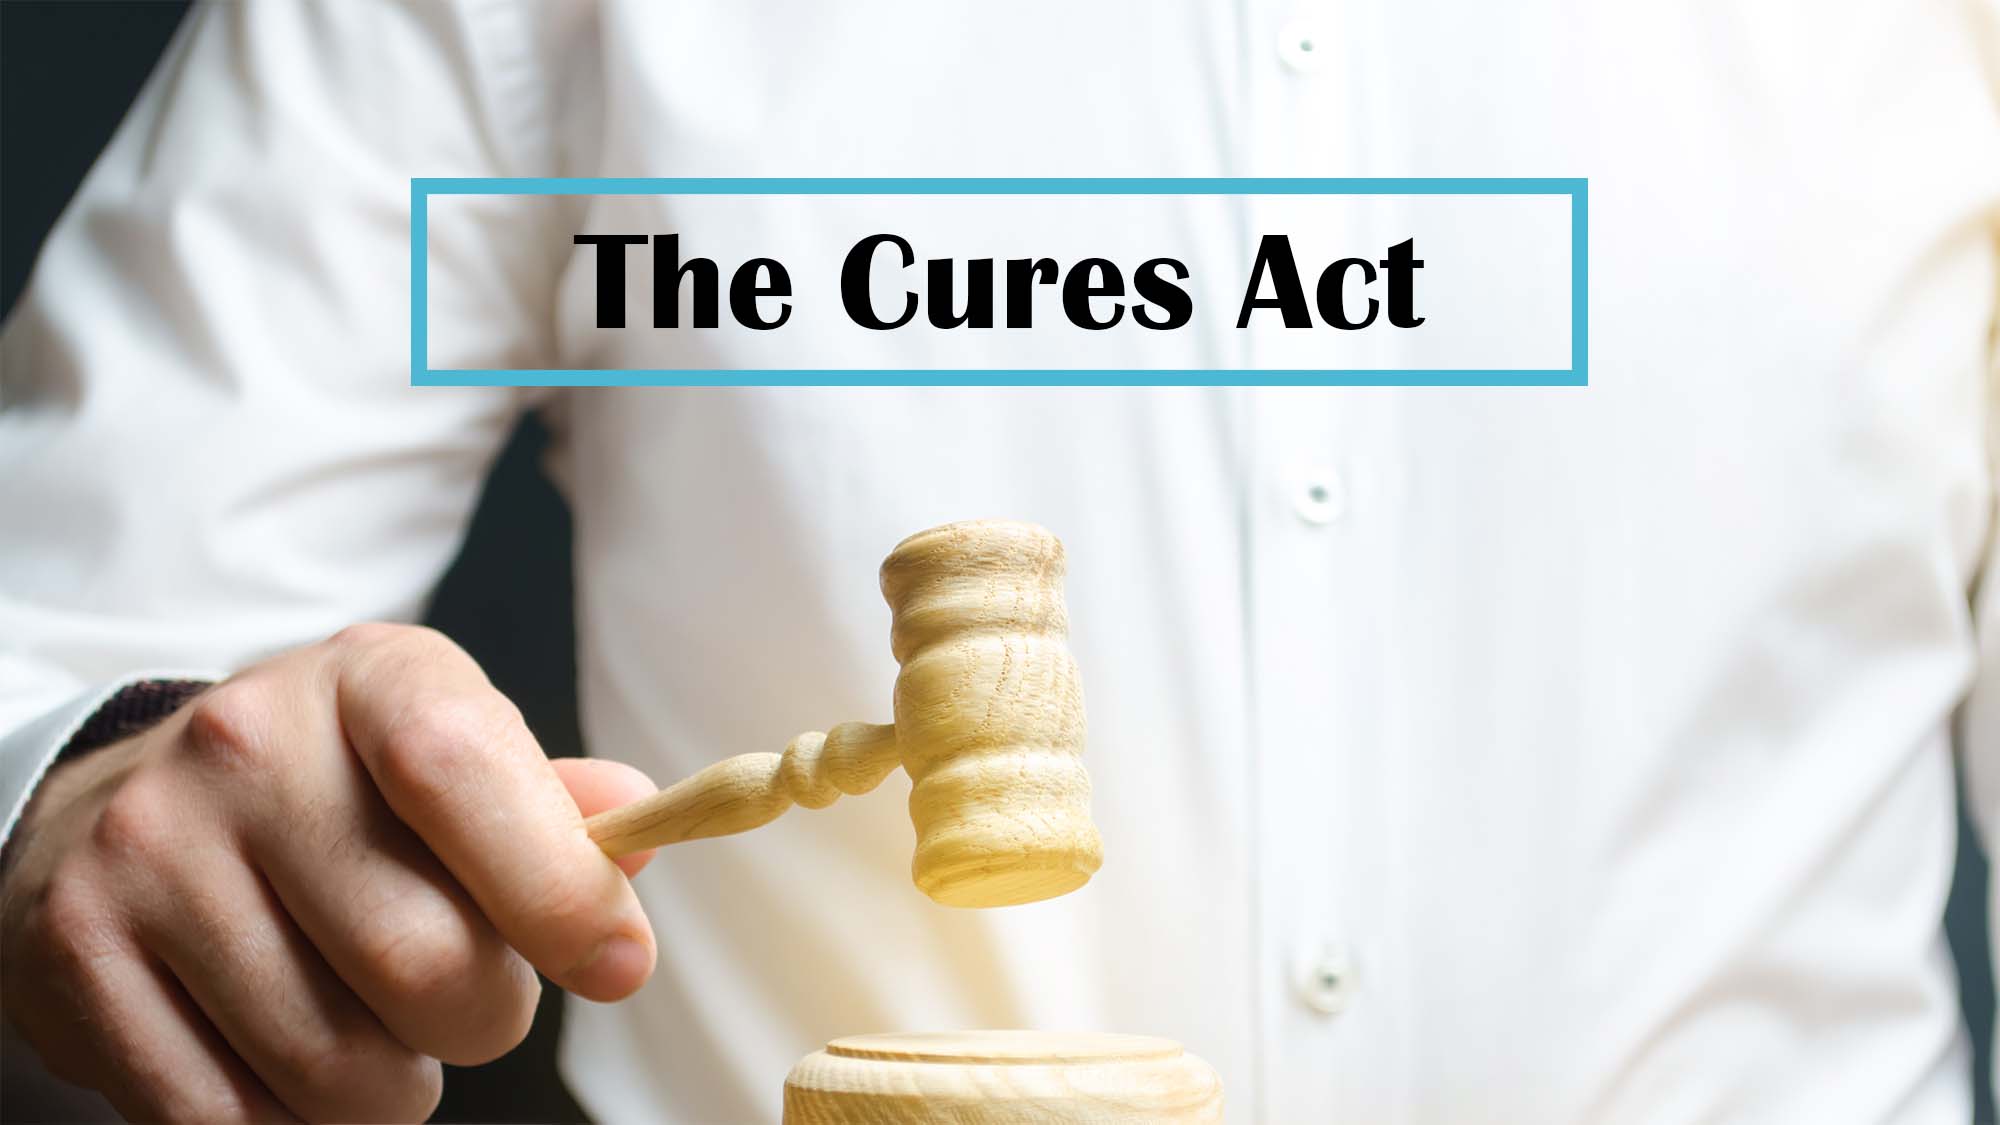 The Cures Act